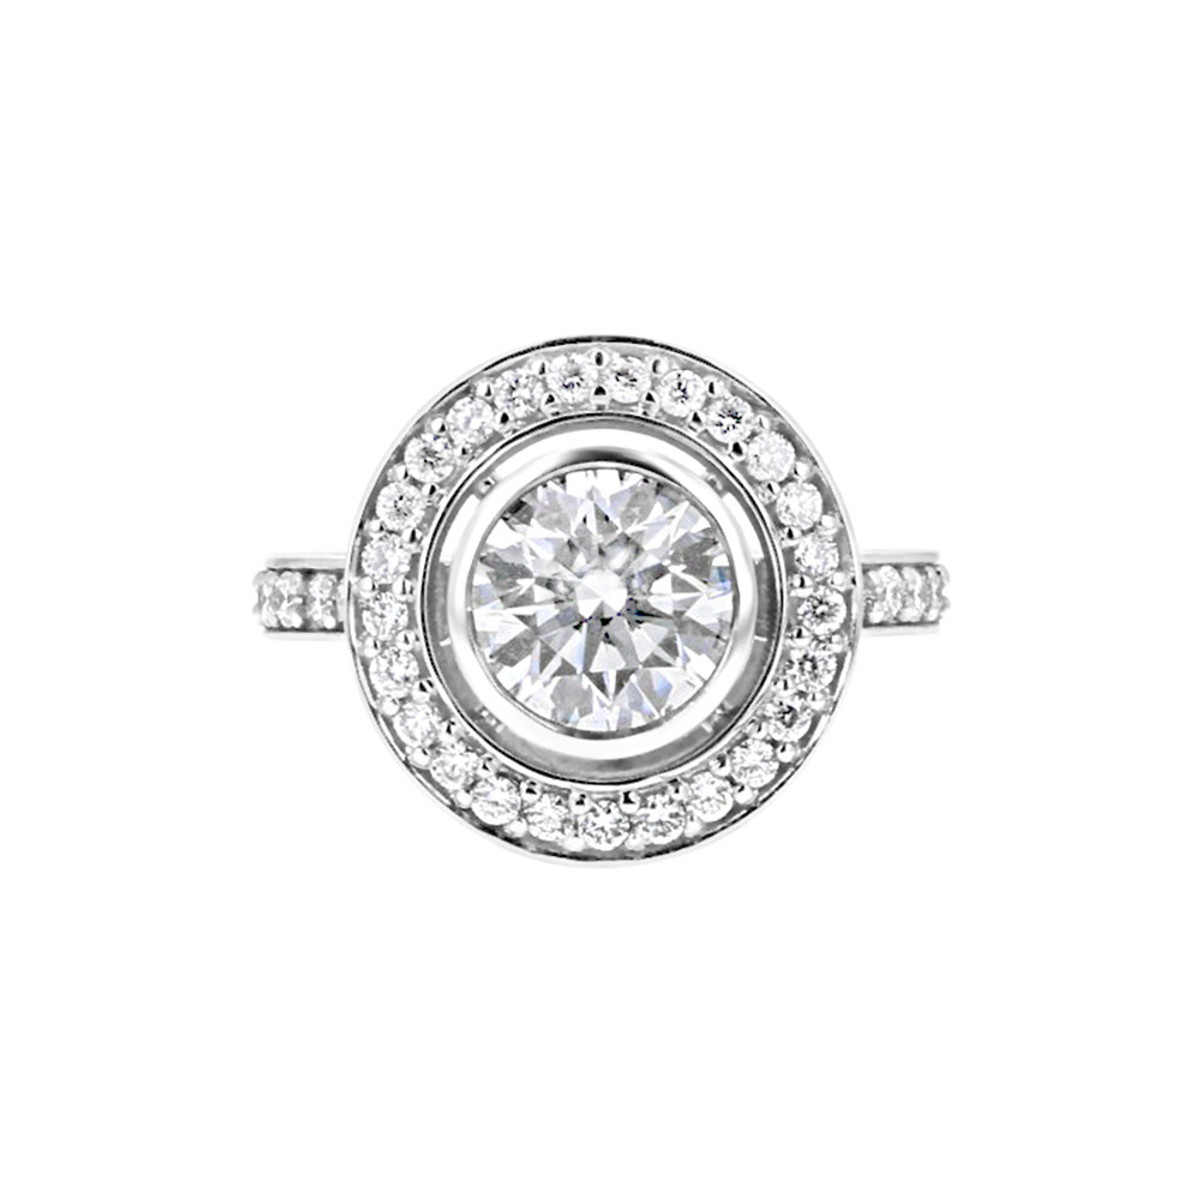 Engage 19KT White Gold & 1.50CT GIA Diamond Solitaire Halo Engagement Ring-DSCRD0438